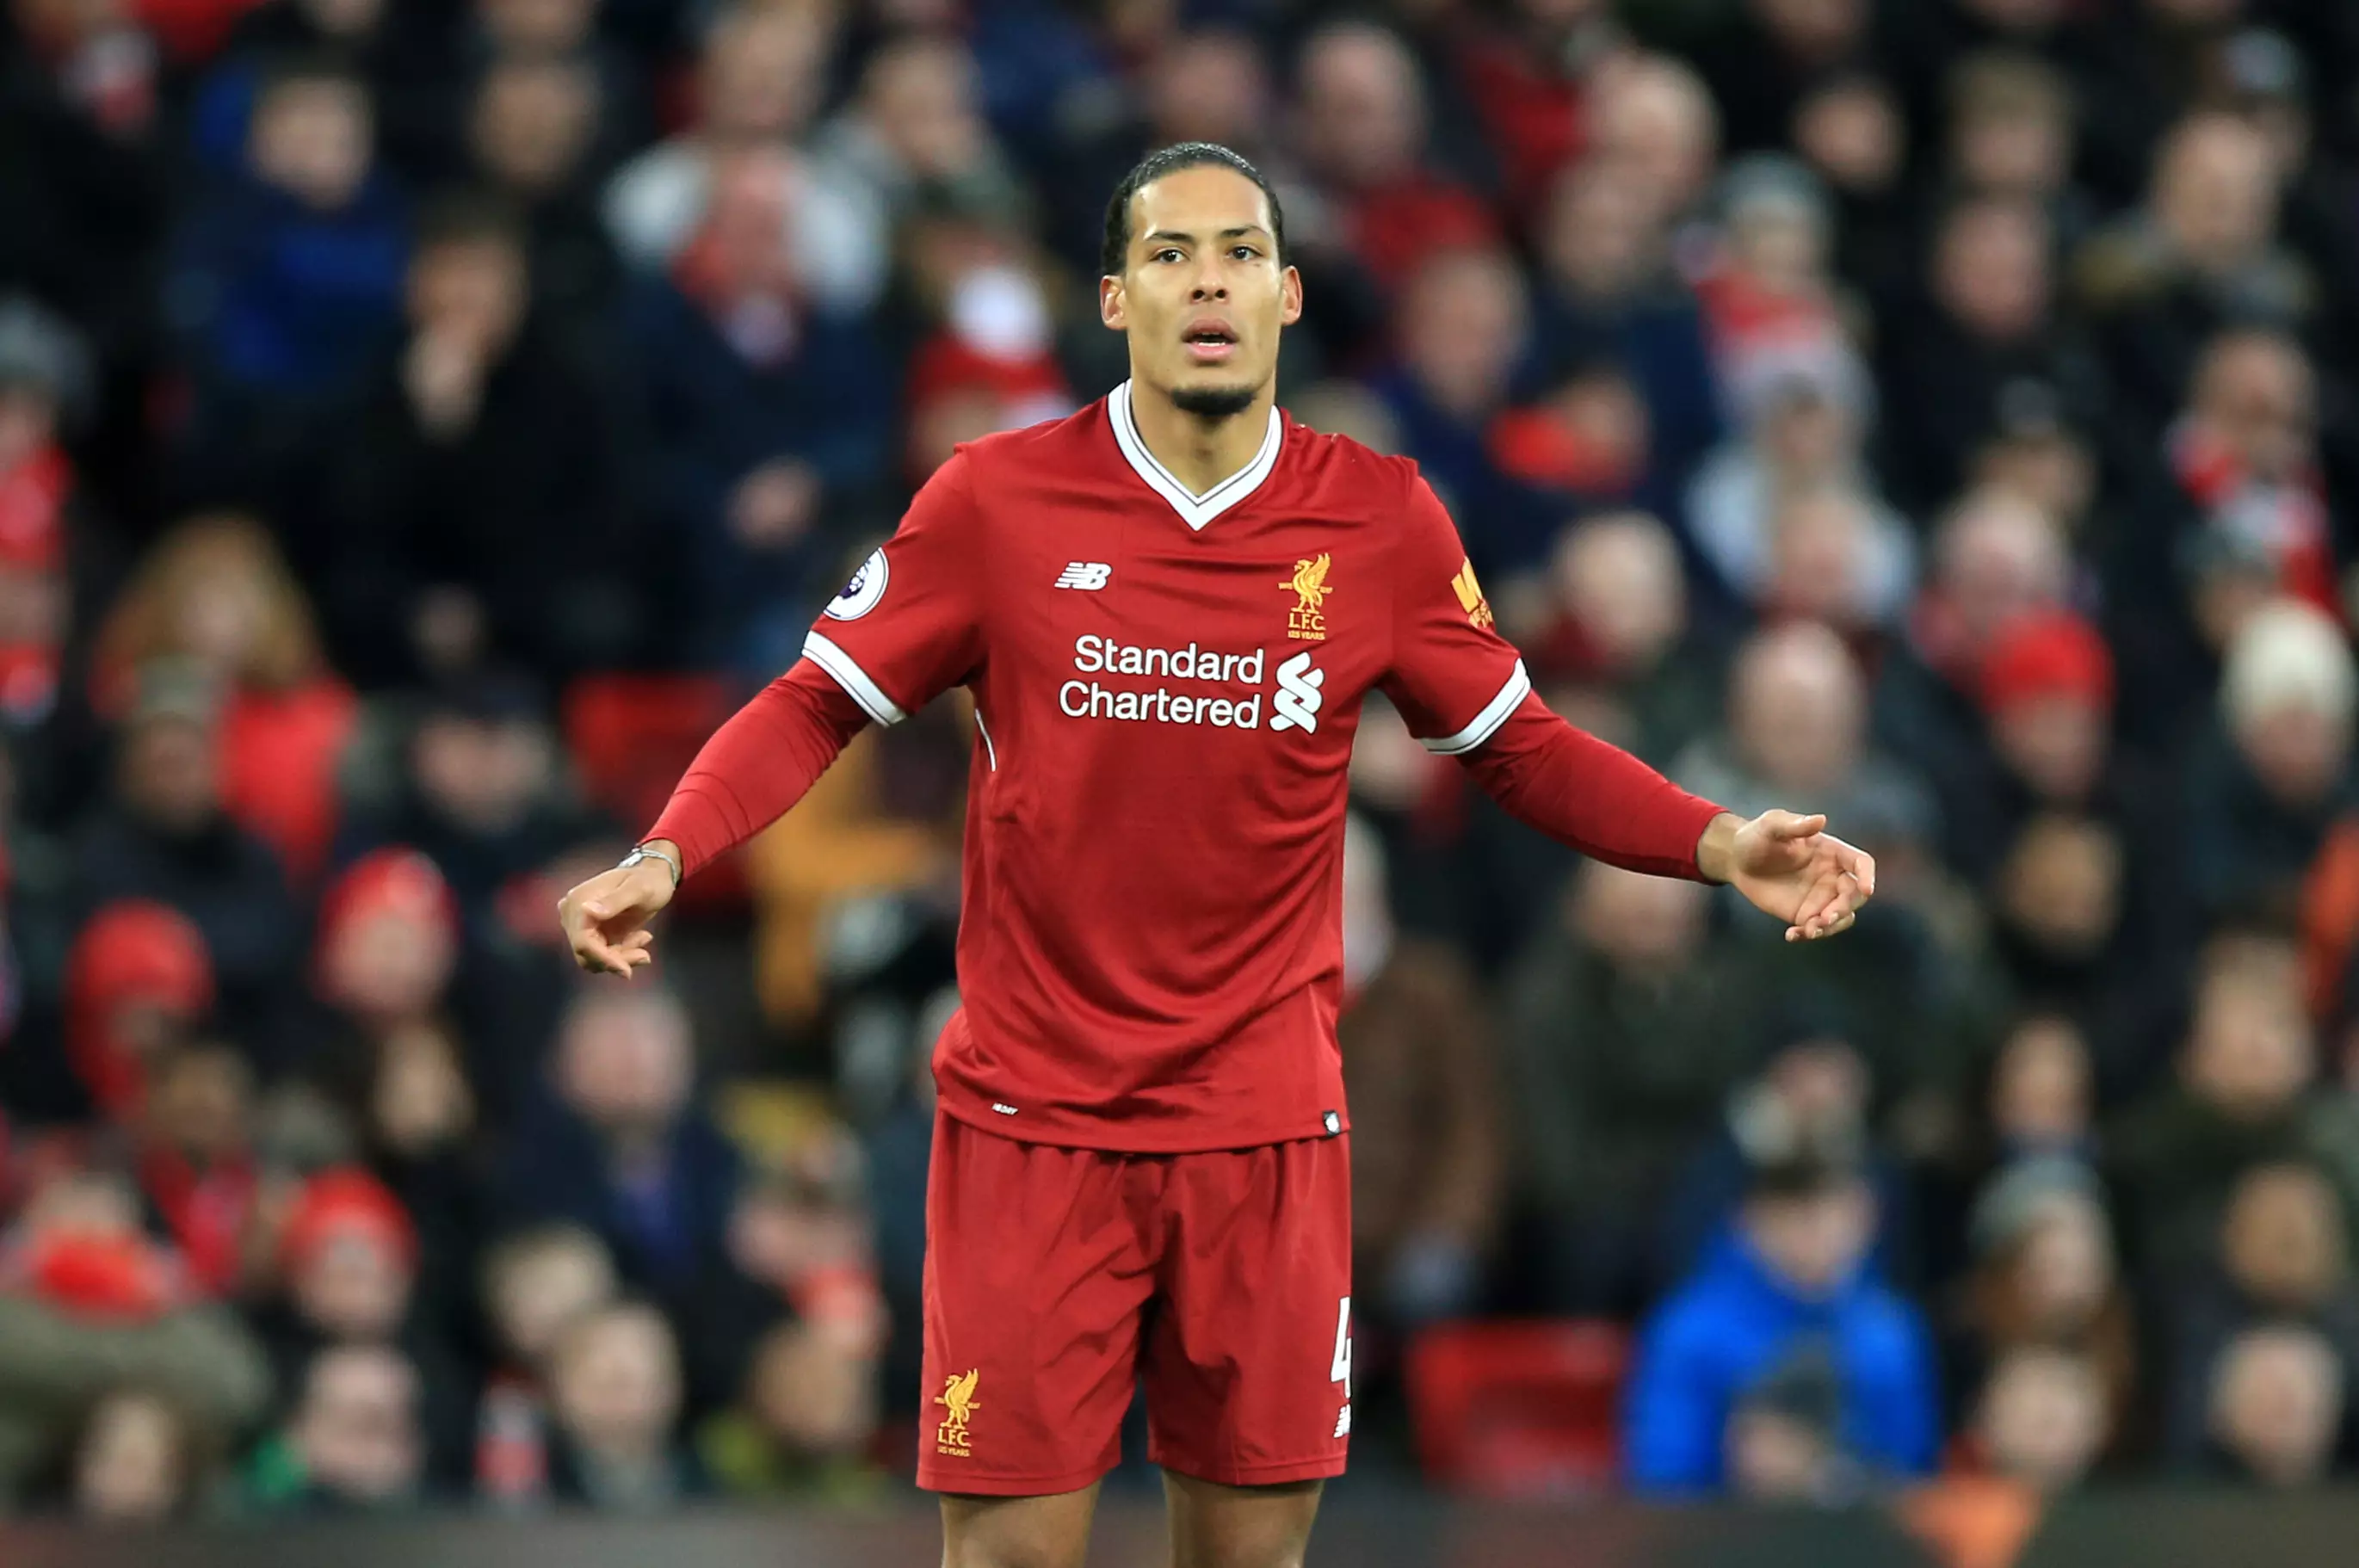 Van Dijk's move has shown the way for others. Image: PA Images